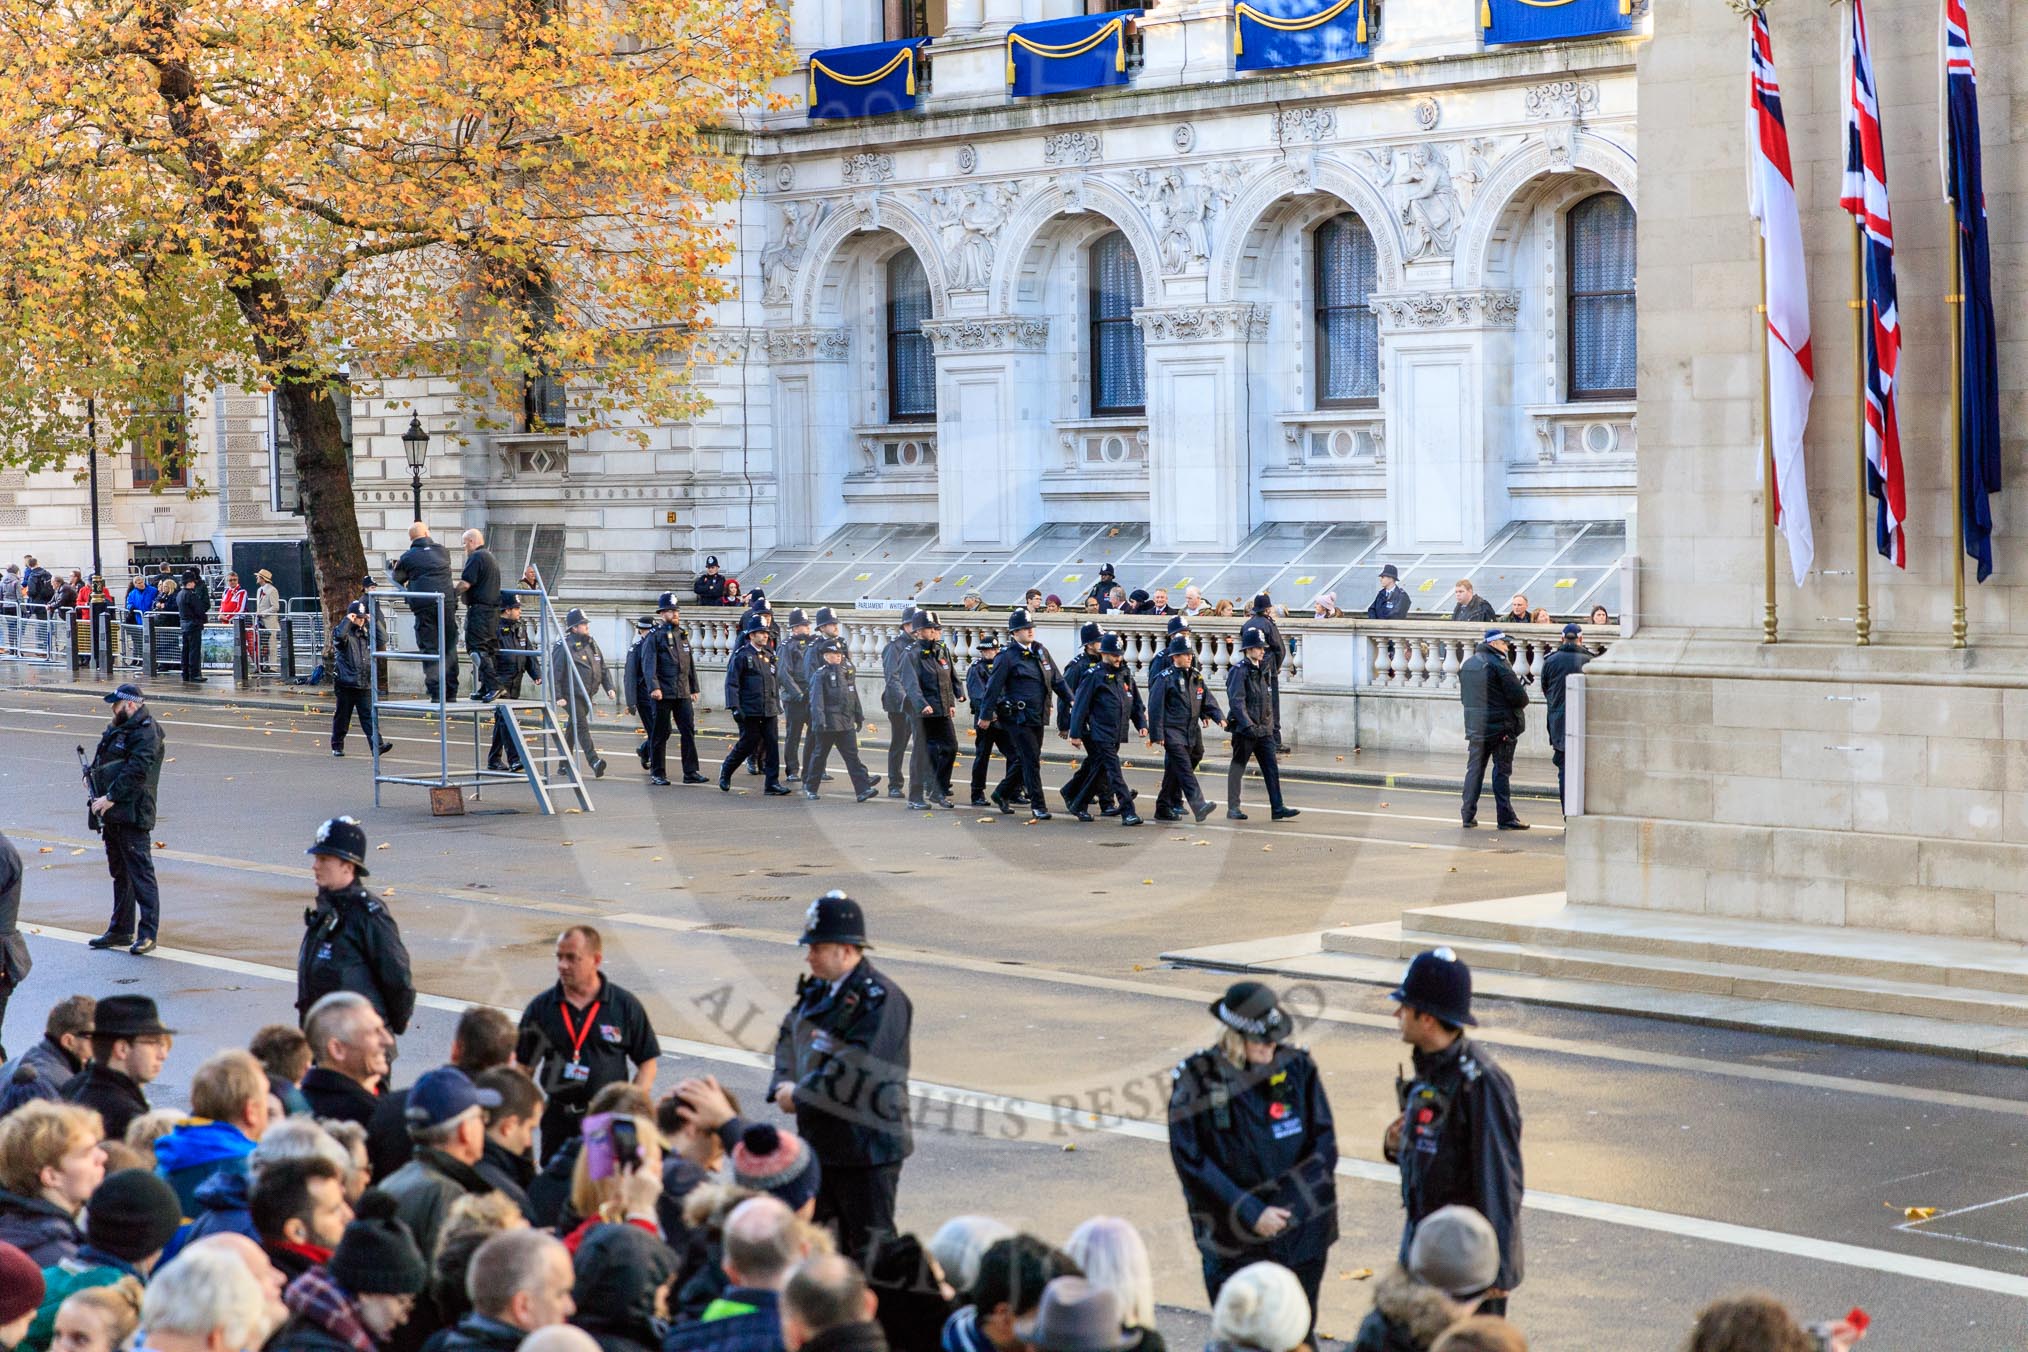 More police arriving on Whitehall before the  Remembrance Sunday Cenotaph Ceremony 2018 at Horse Guards Parade, Westminster, London, 11 November 2018, 08:38.